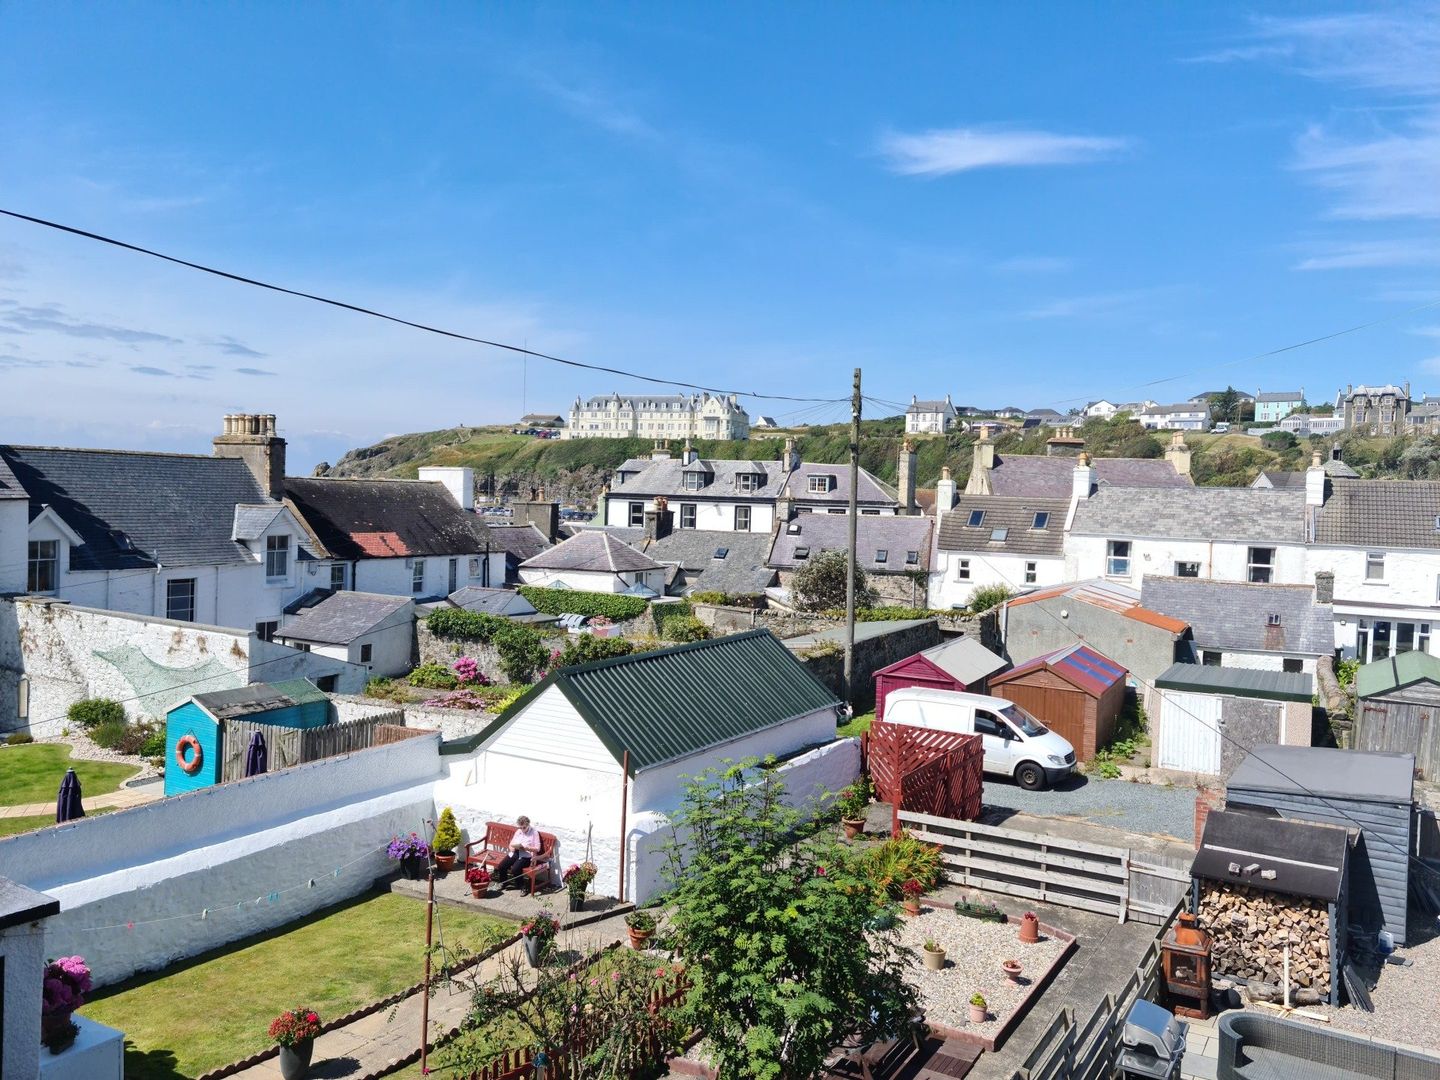 View over the village of Portpatrick SW Scotland